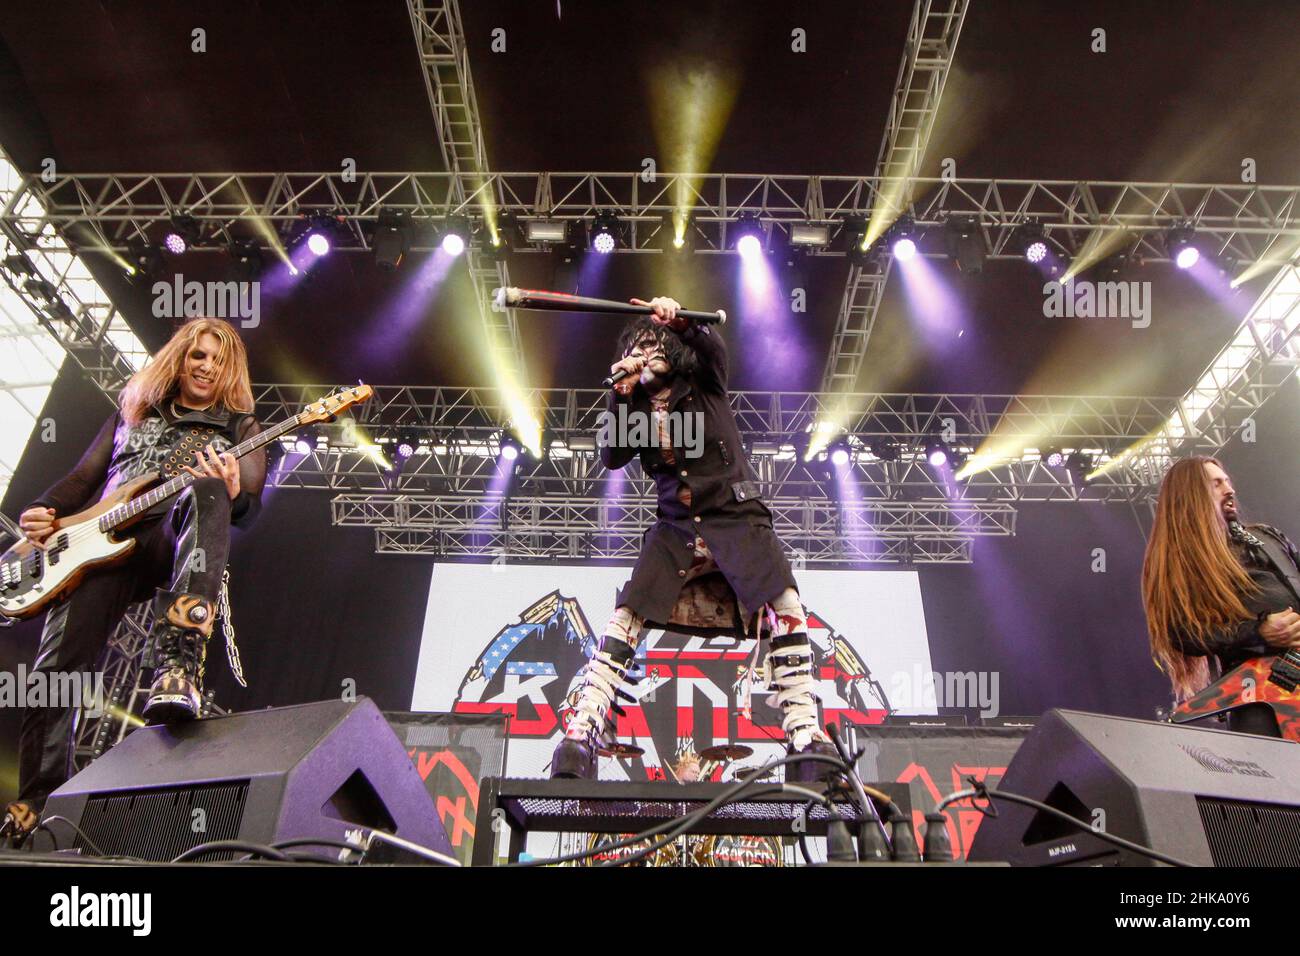 LA Metal band Lizzy Borden  performs on the stage during an Pentaport Rock Festival at the  Songdo, Near IFEZ in Incheon. Festival held Aug 1 to3th three day schedule every year. Stock Photo